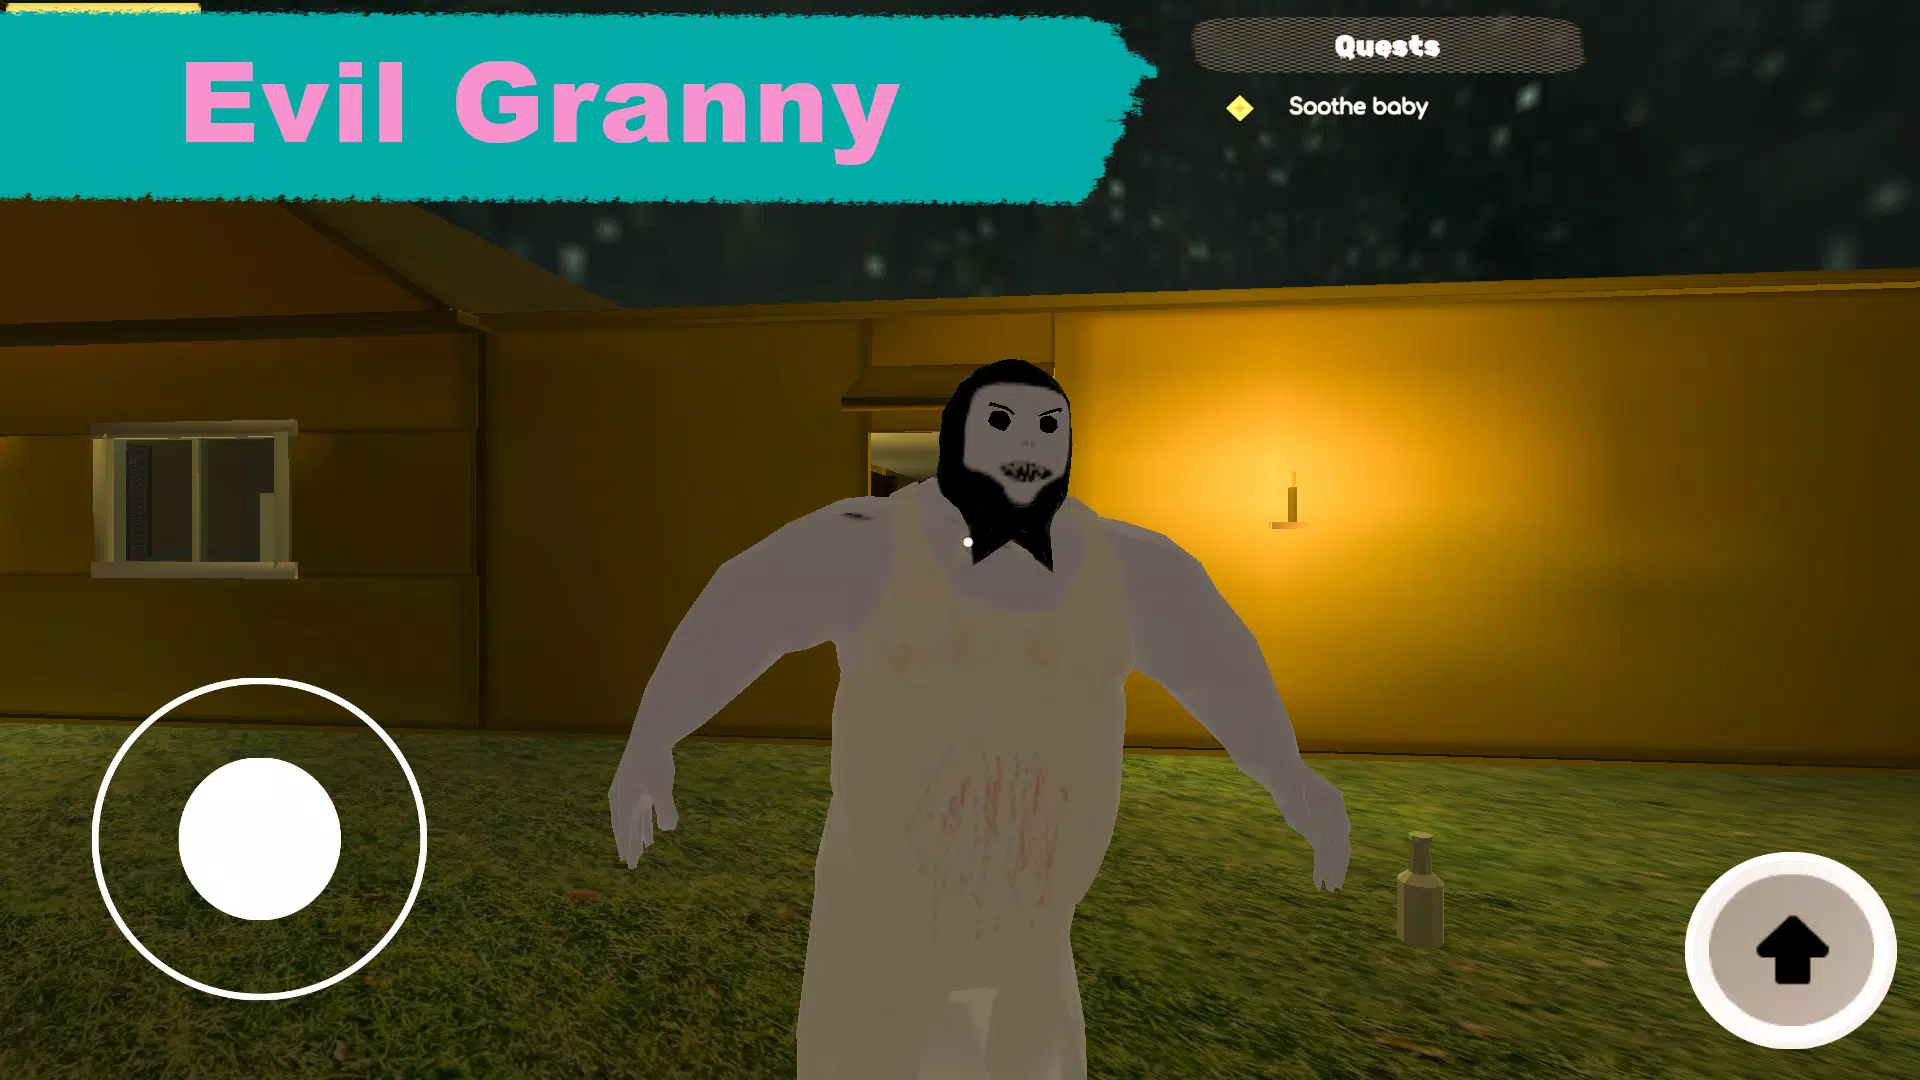 What's wrong with Roblox Granny?! - BiliBili